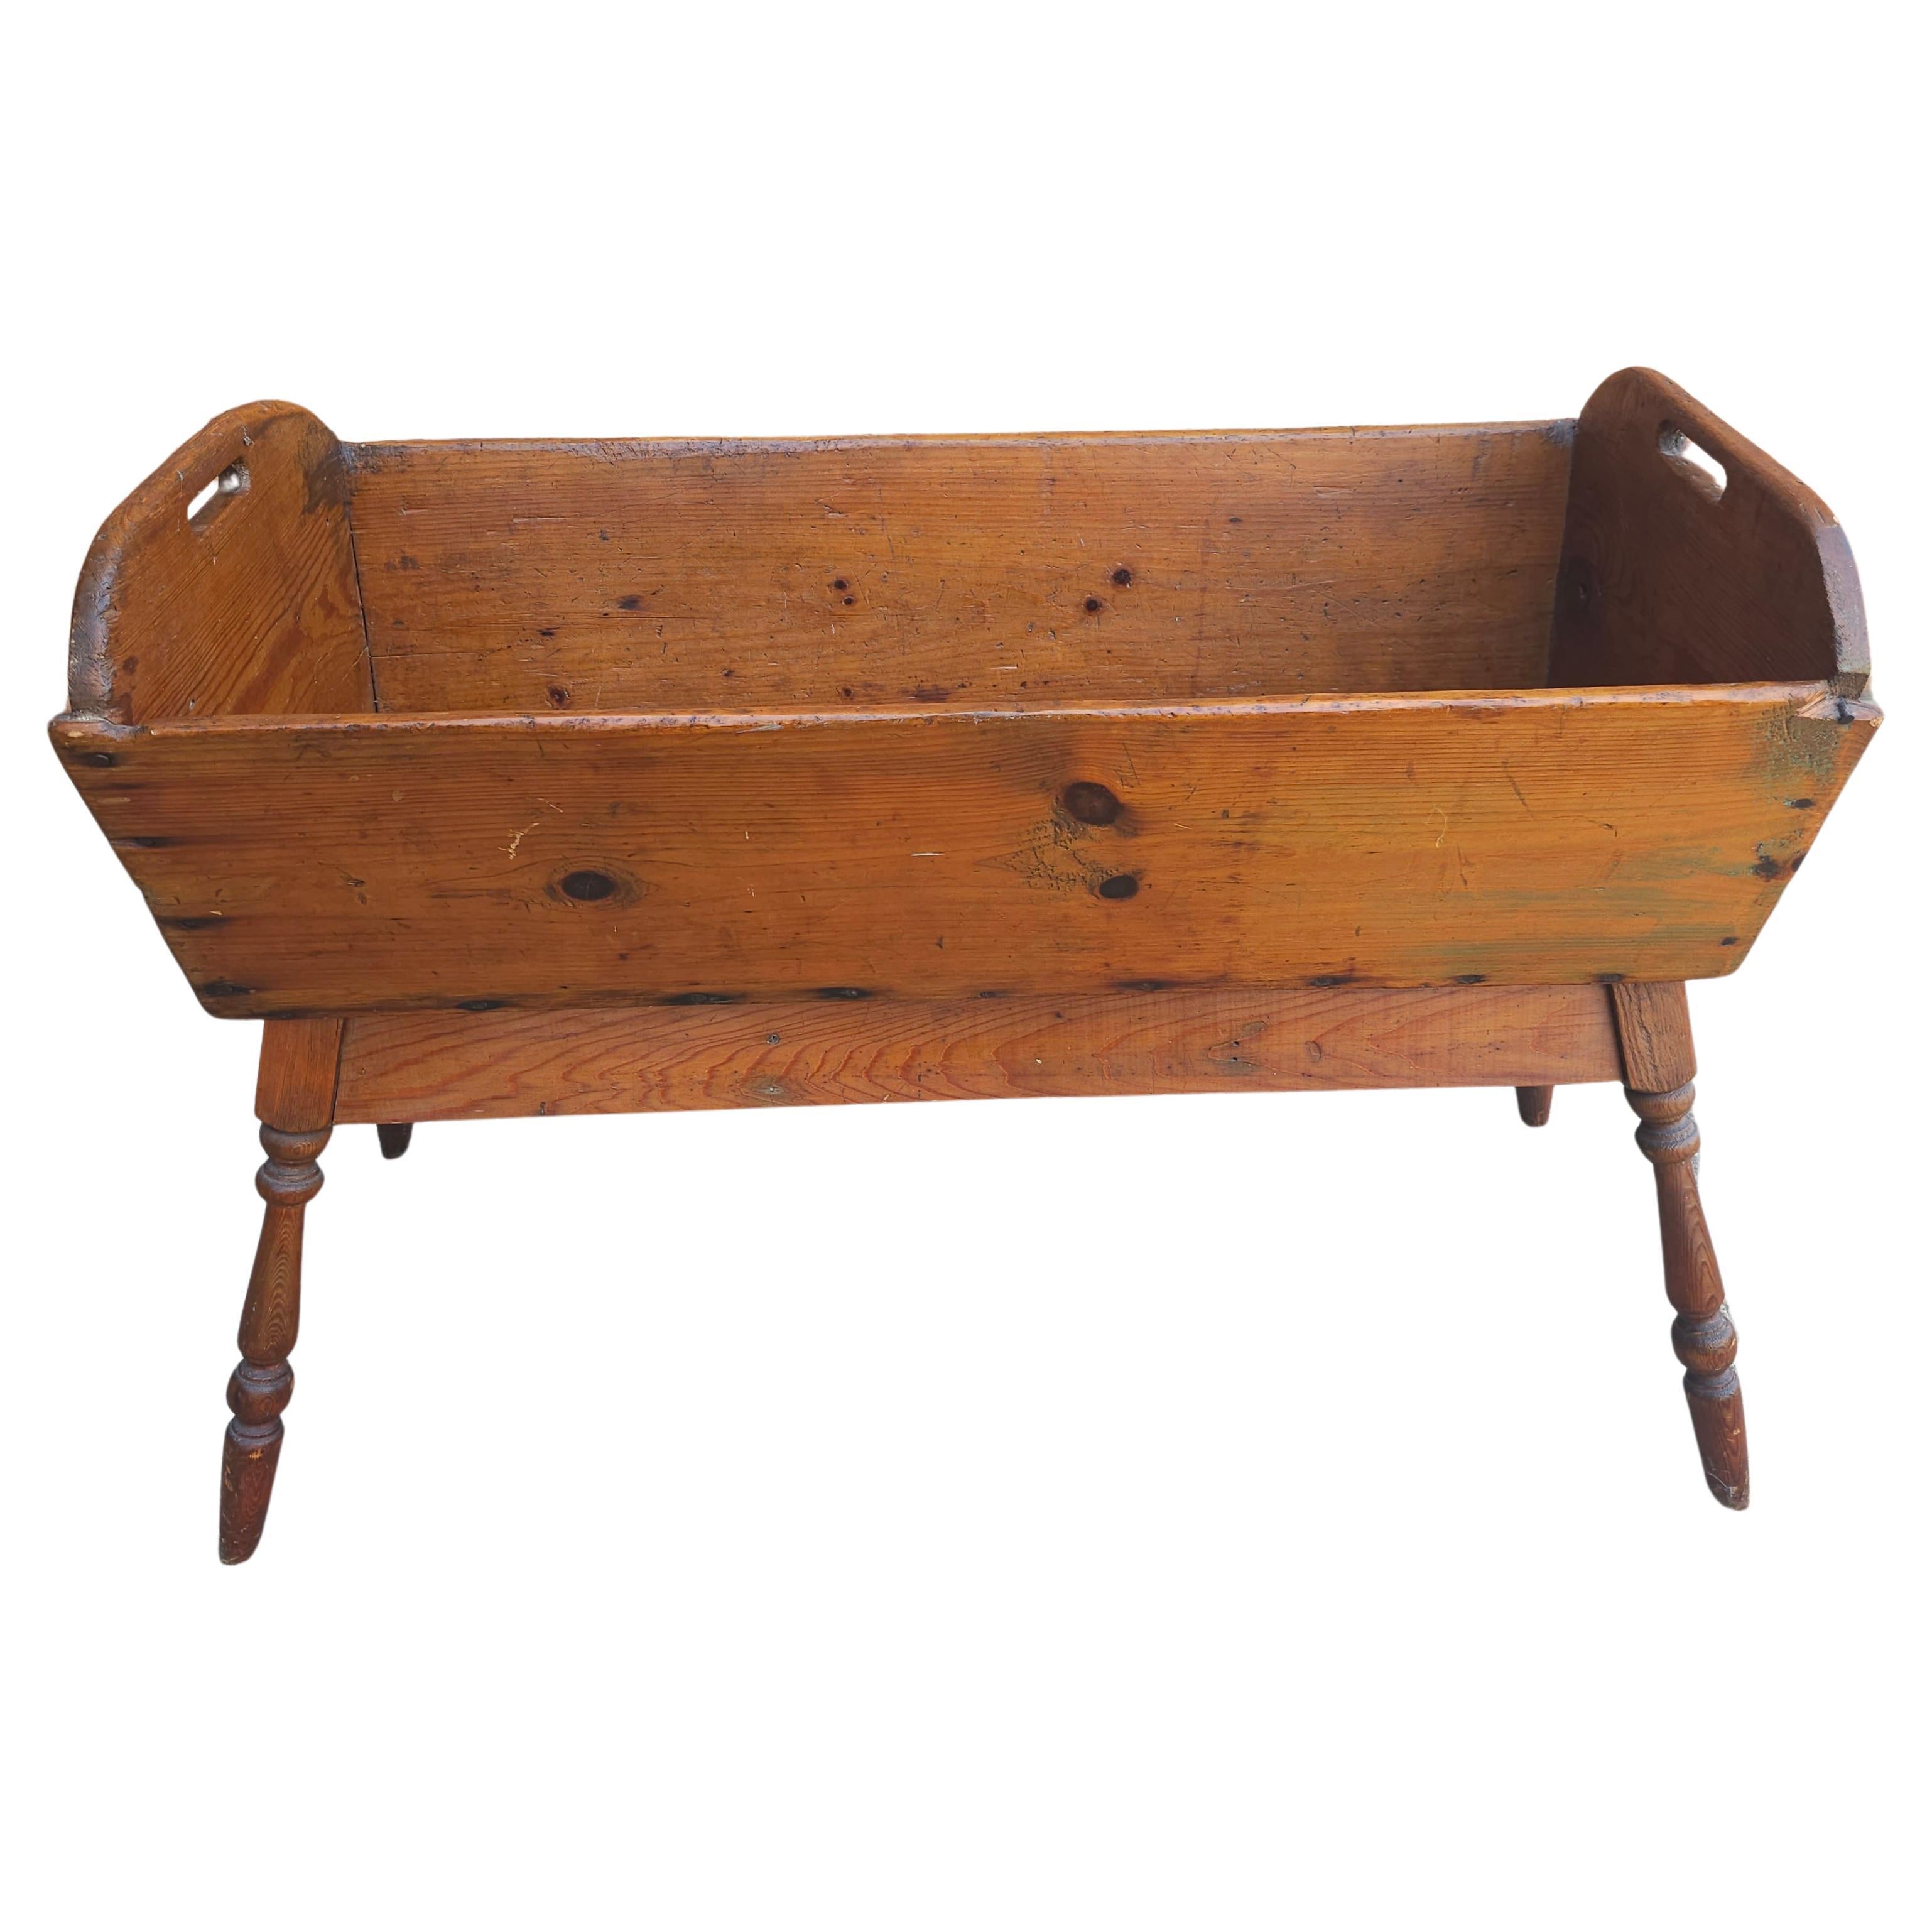 19th Century Pennsylvania Pine Dough Trough / Flower Bed, Planter on Stand. These Dough Trough are used these days for decorative purposes and mostly as planters. Measures 48